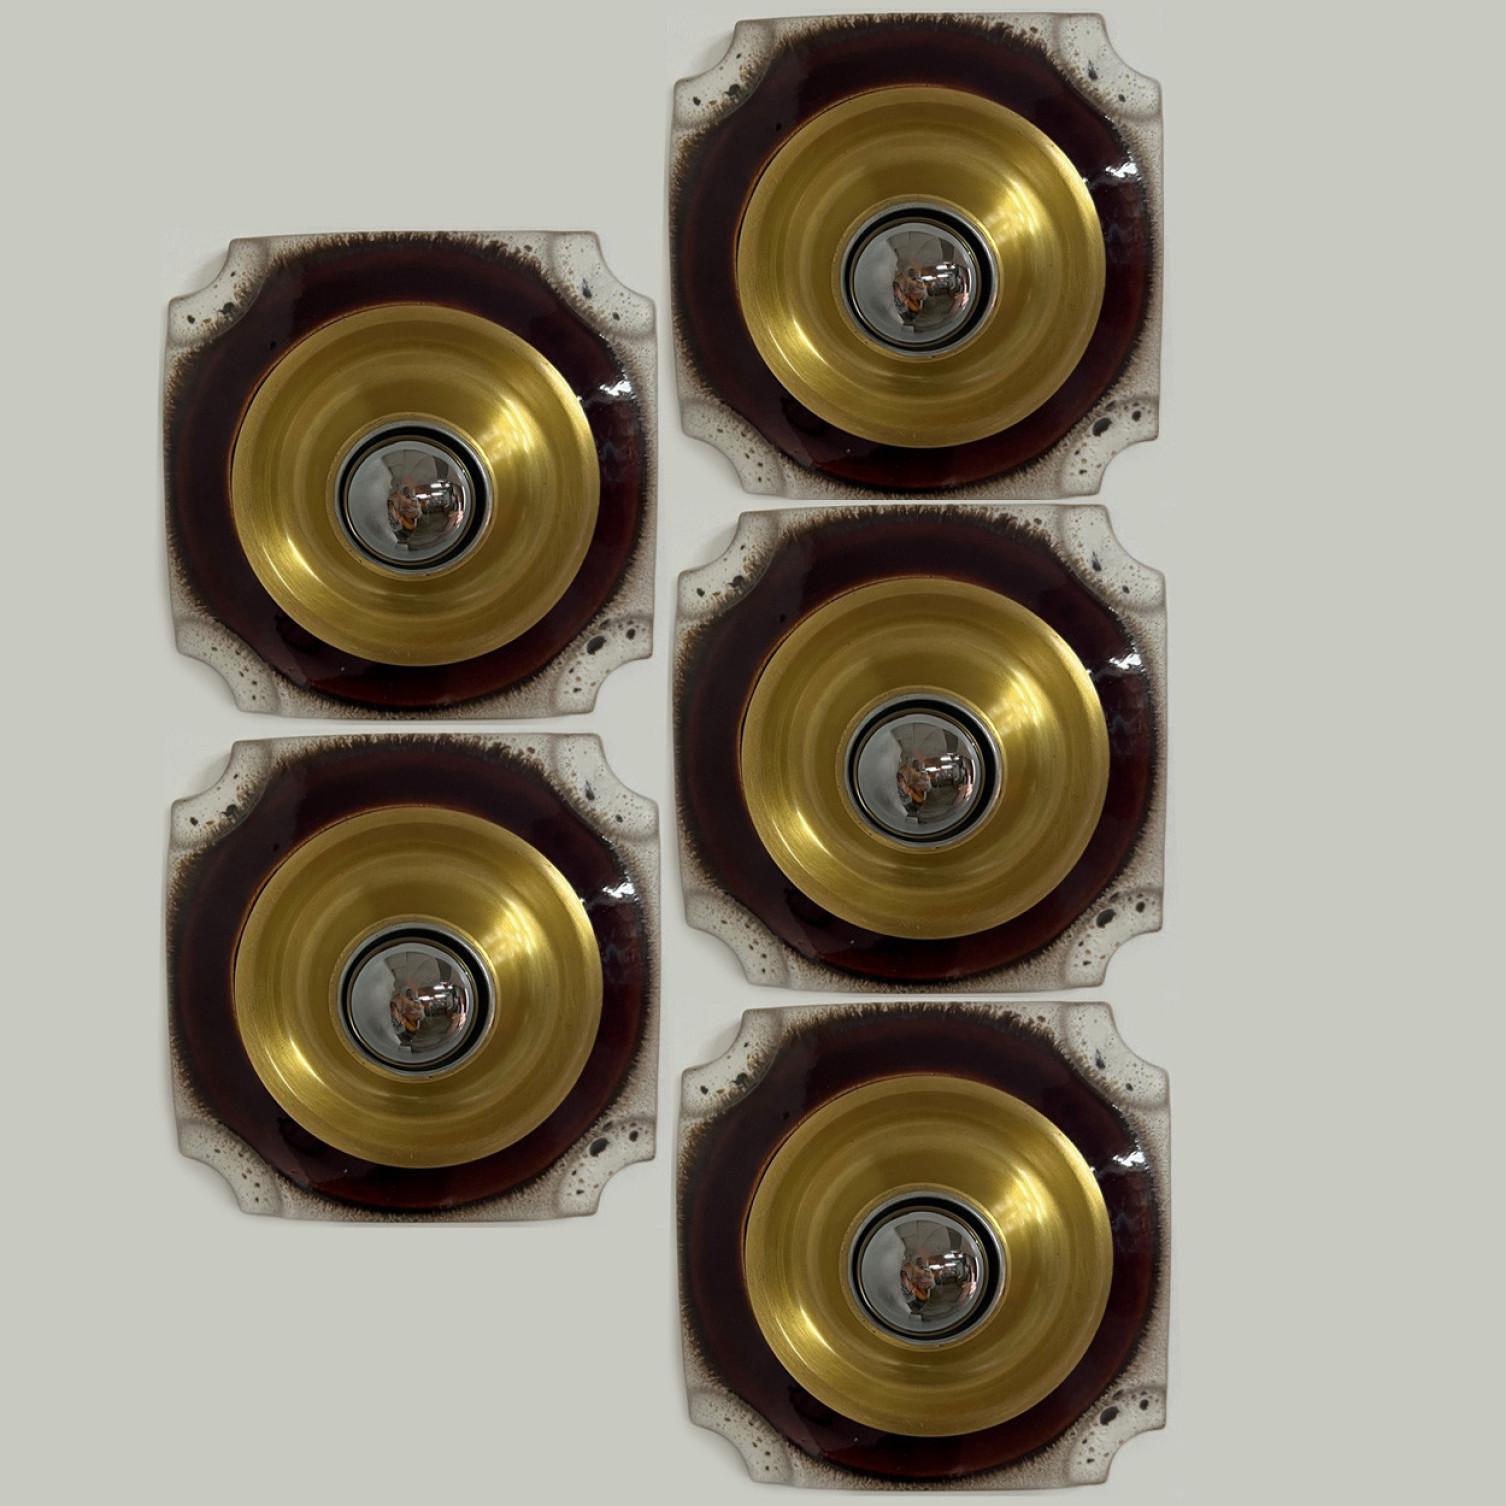 Brown gold ceramic wall lights in Fat Lava style. Manufactured in Germany in the 1970s.

The glaze is in a brown and gold color.

We used smoked light bulbs (see images), but silver/ gold mirror or  white light bulbs are also very stylish ( see